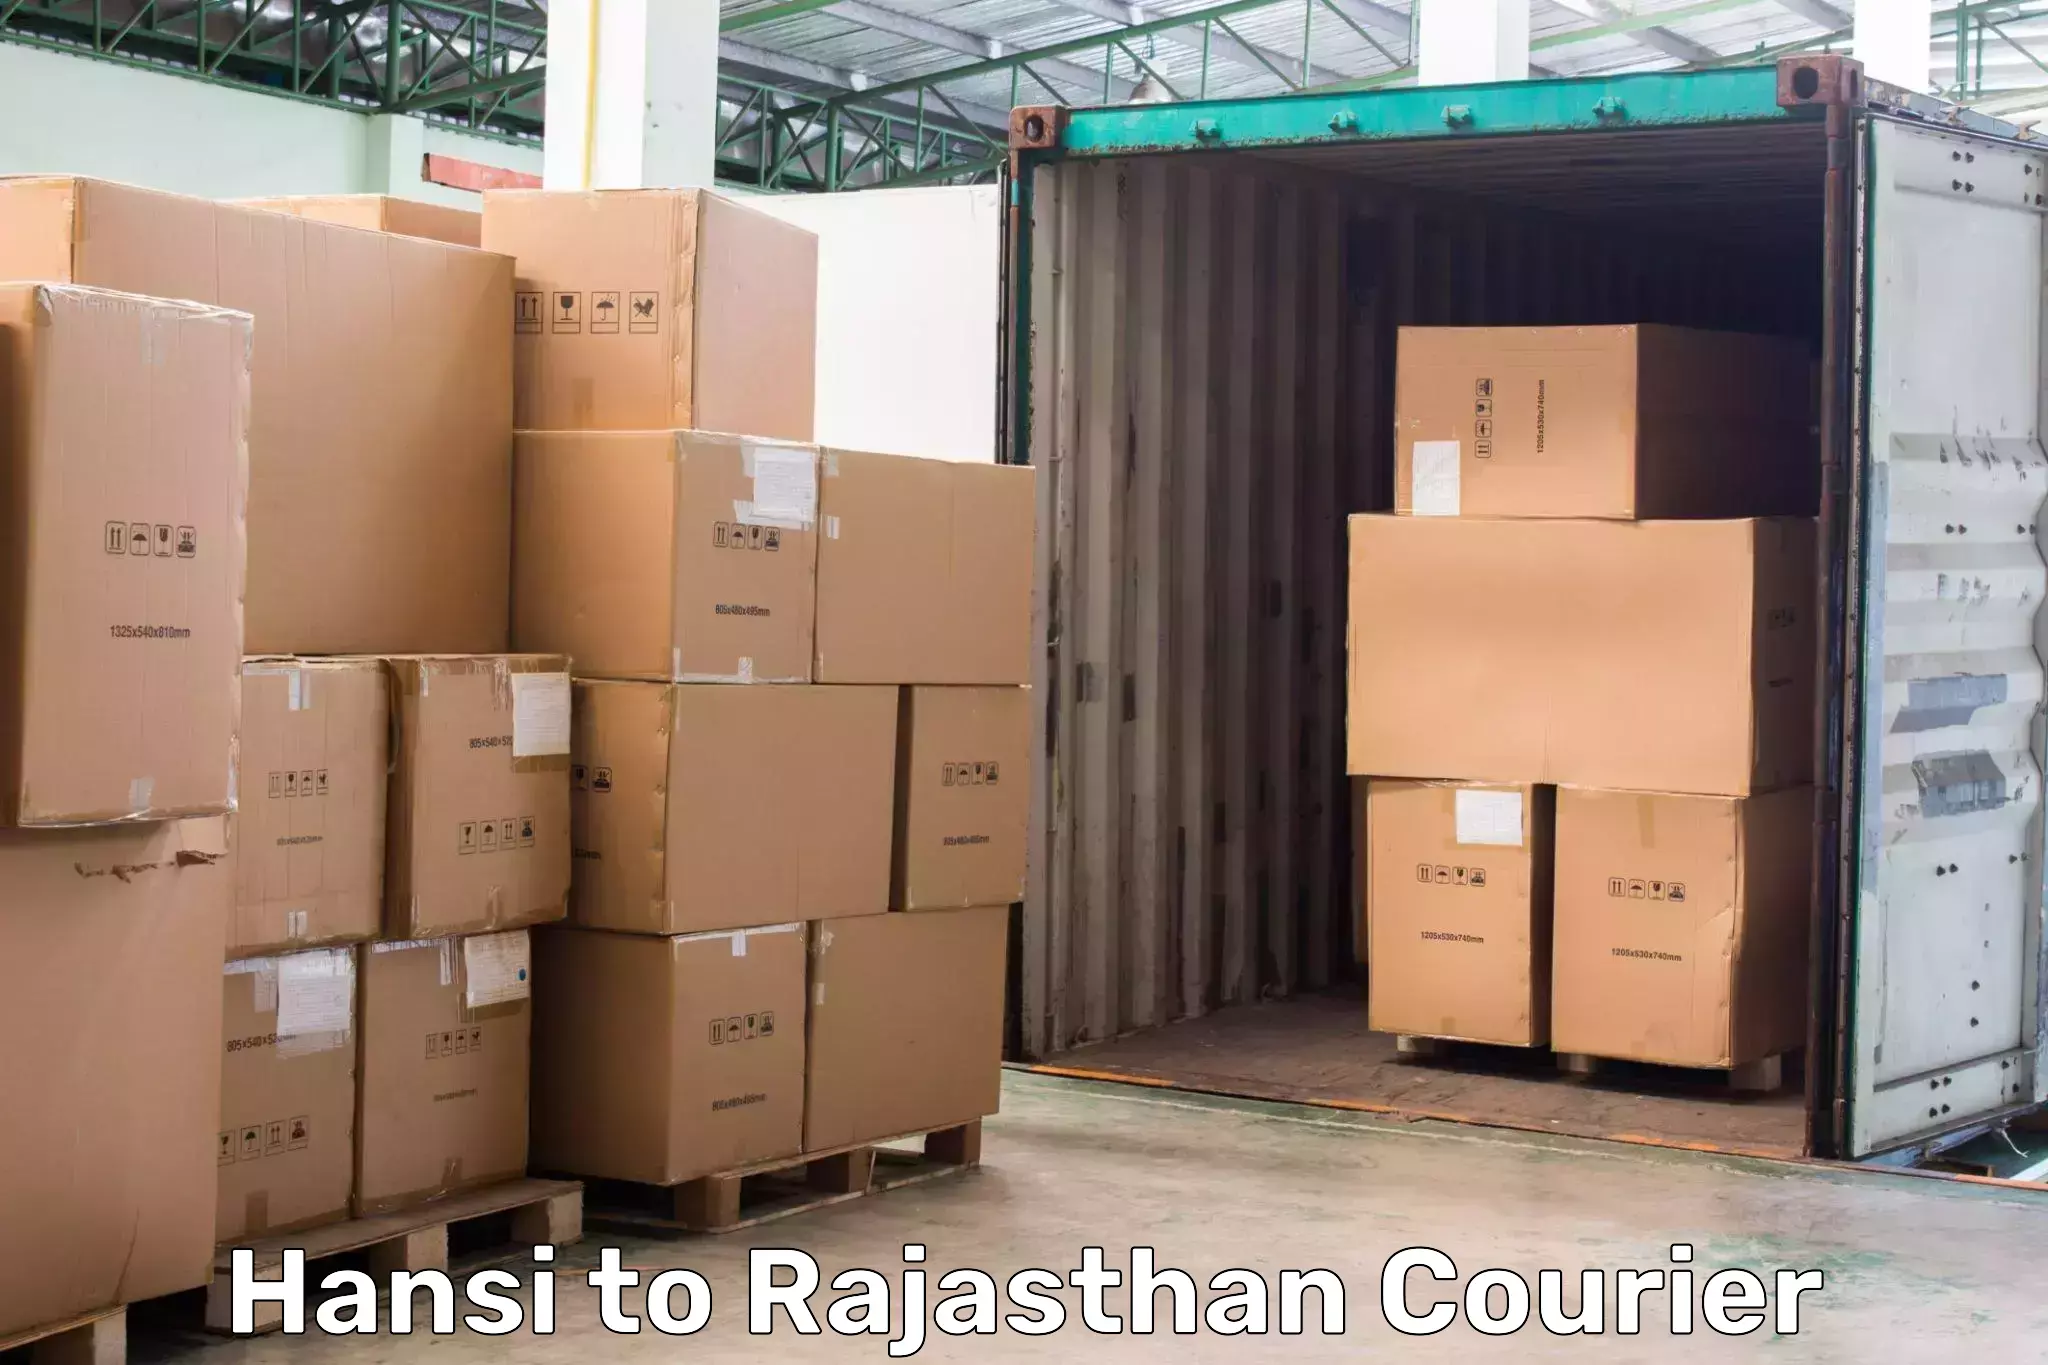 State-of-the-art courier technology Hansi to Bayana